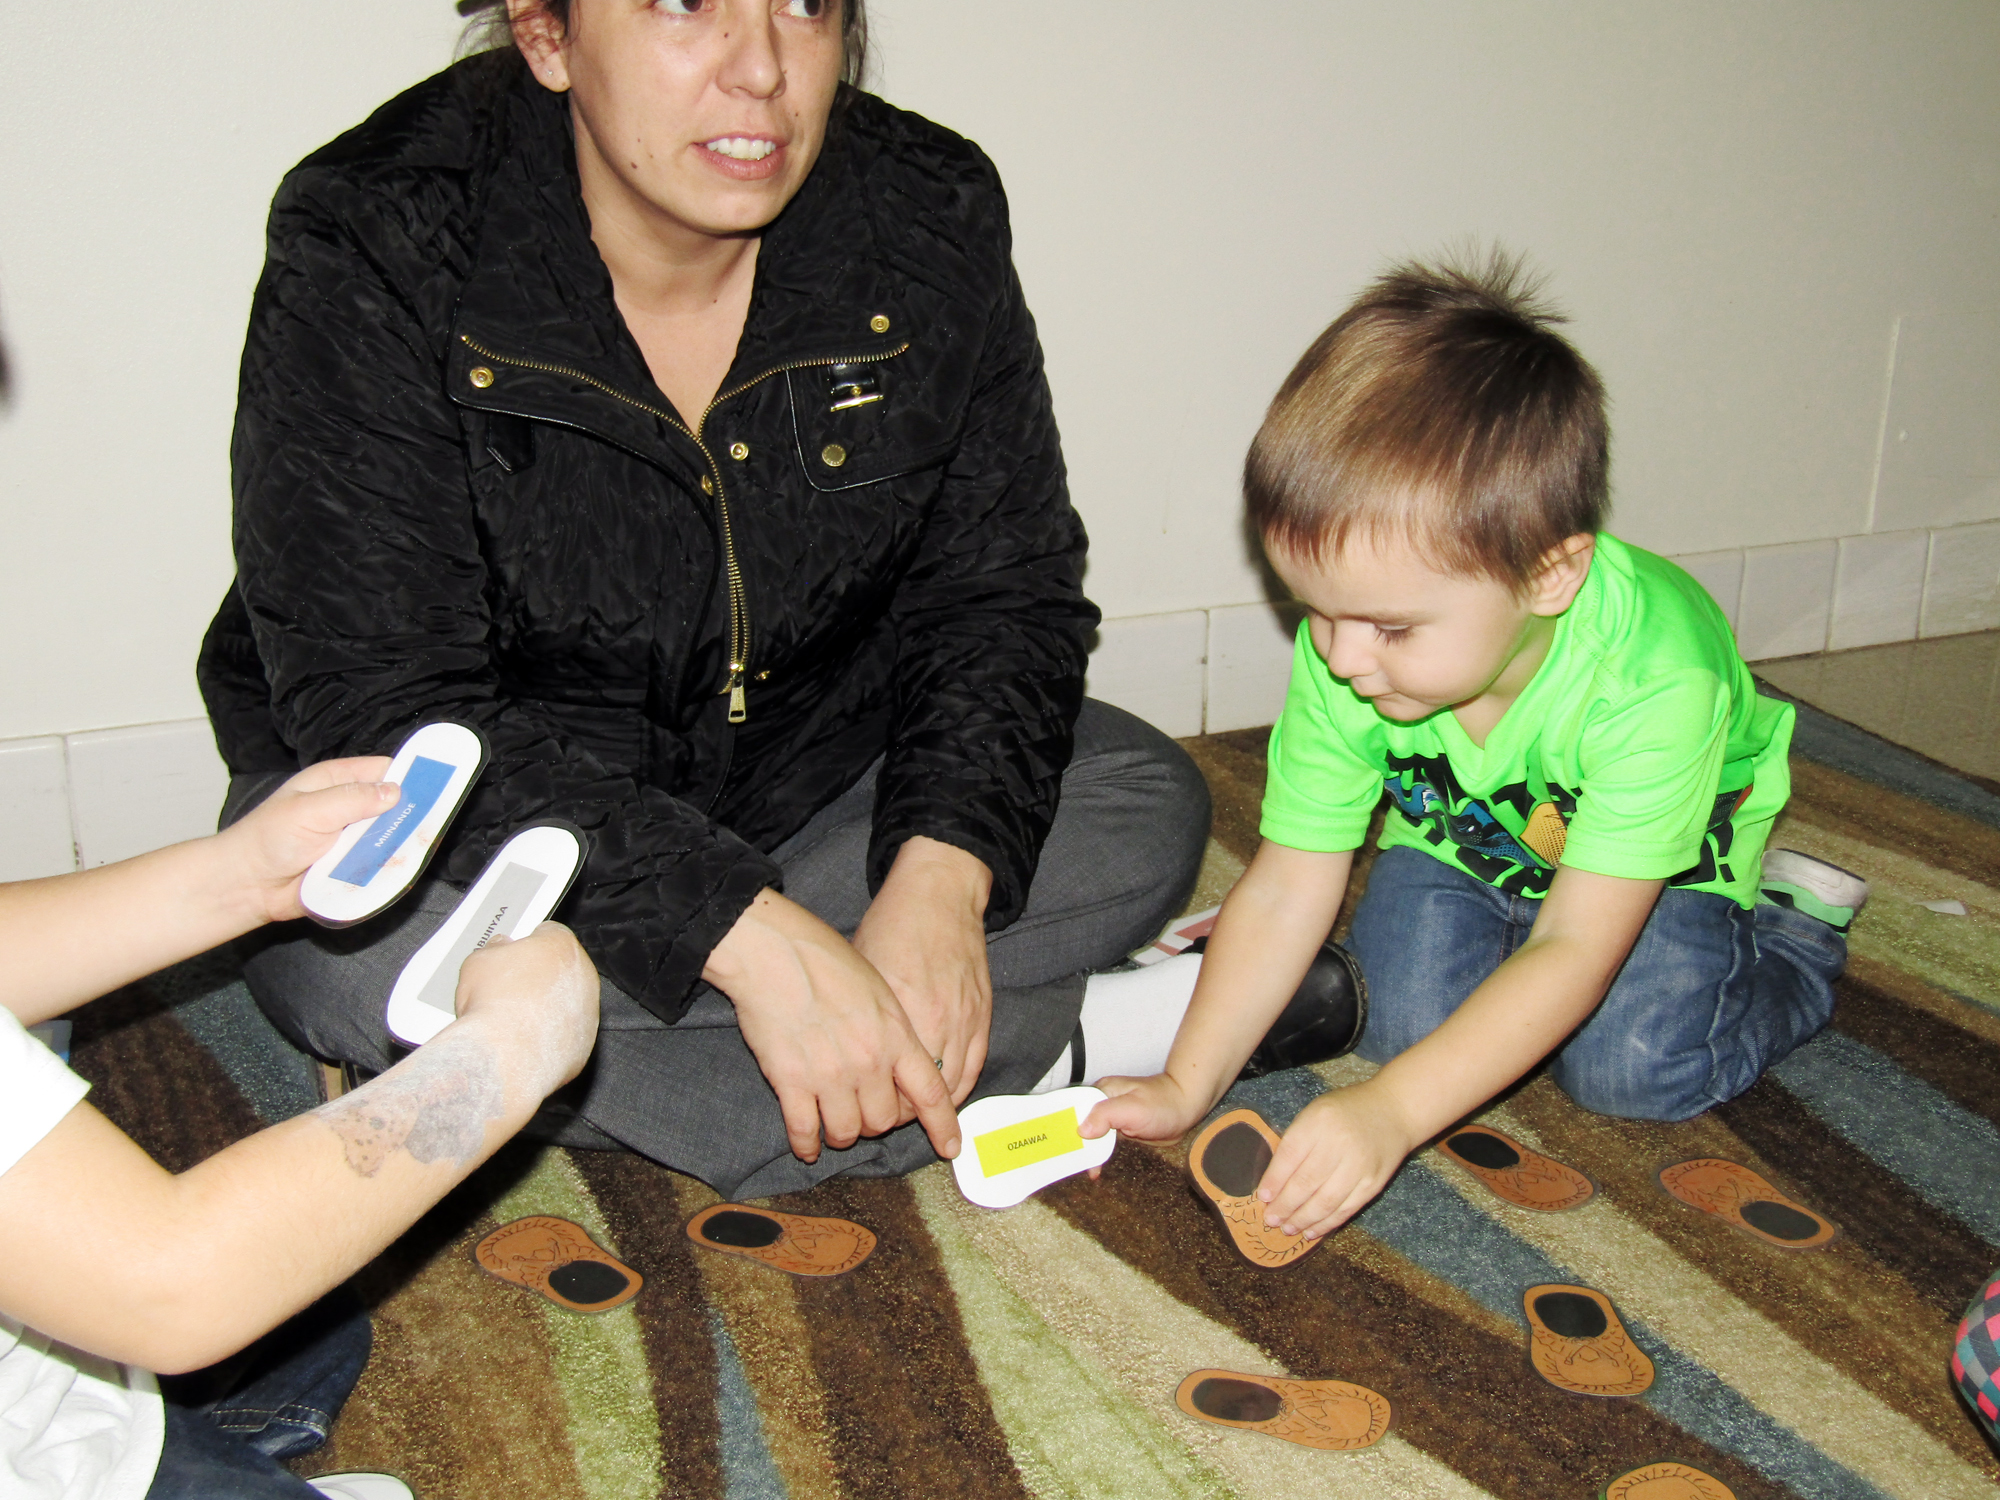 KBOCC cultural consultant engages children during a moccasin color matching game using Ojibwe words.